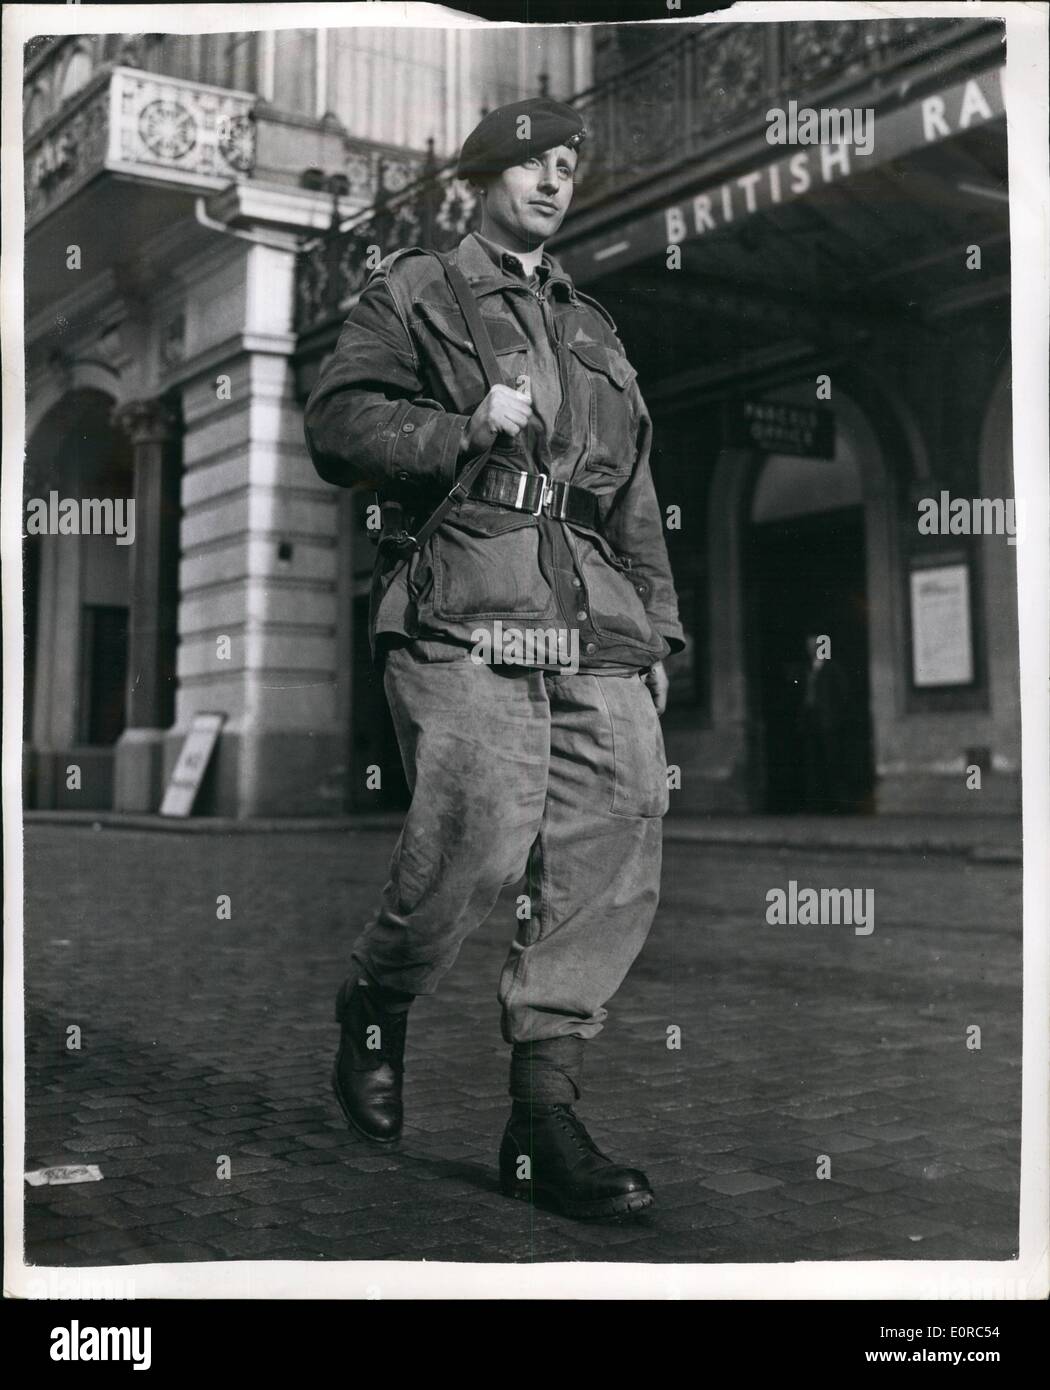 Jan. 01, 1959 - Royal Marine Commando Just Fails To Set Up New Marching Record: Corporal Ronald Knight, 28-year-old Royal Marine Commando from Romford, Essex - member of the Royal Marine Forces Volunteer Reserve, City of Lono Unit - arrived at haring Cross station this afternoon - at the ned of his weekend walk. Je unluckily had to give up just South of Epping - 10 muiles short of Stratford became of a p[ulled muscle. he was trying to beat the record set up by Lieut. Wayne B. Nicholl of the U.S. Army - who wal;ked 104.8 miles in 40 and a half hours Stock Photo